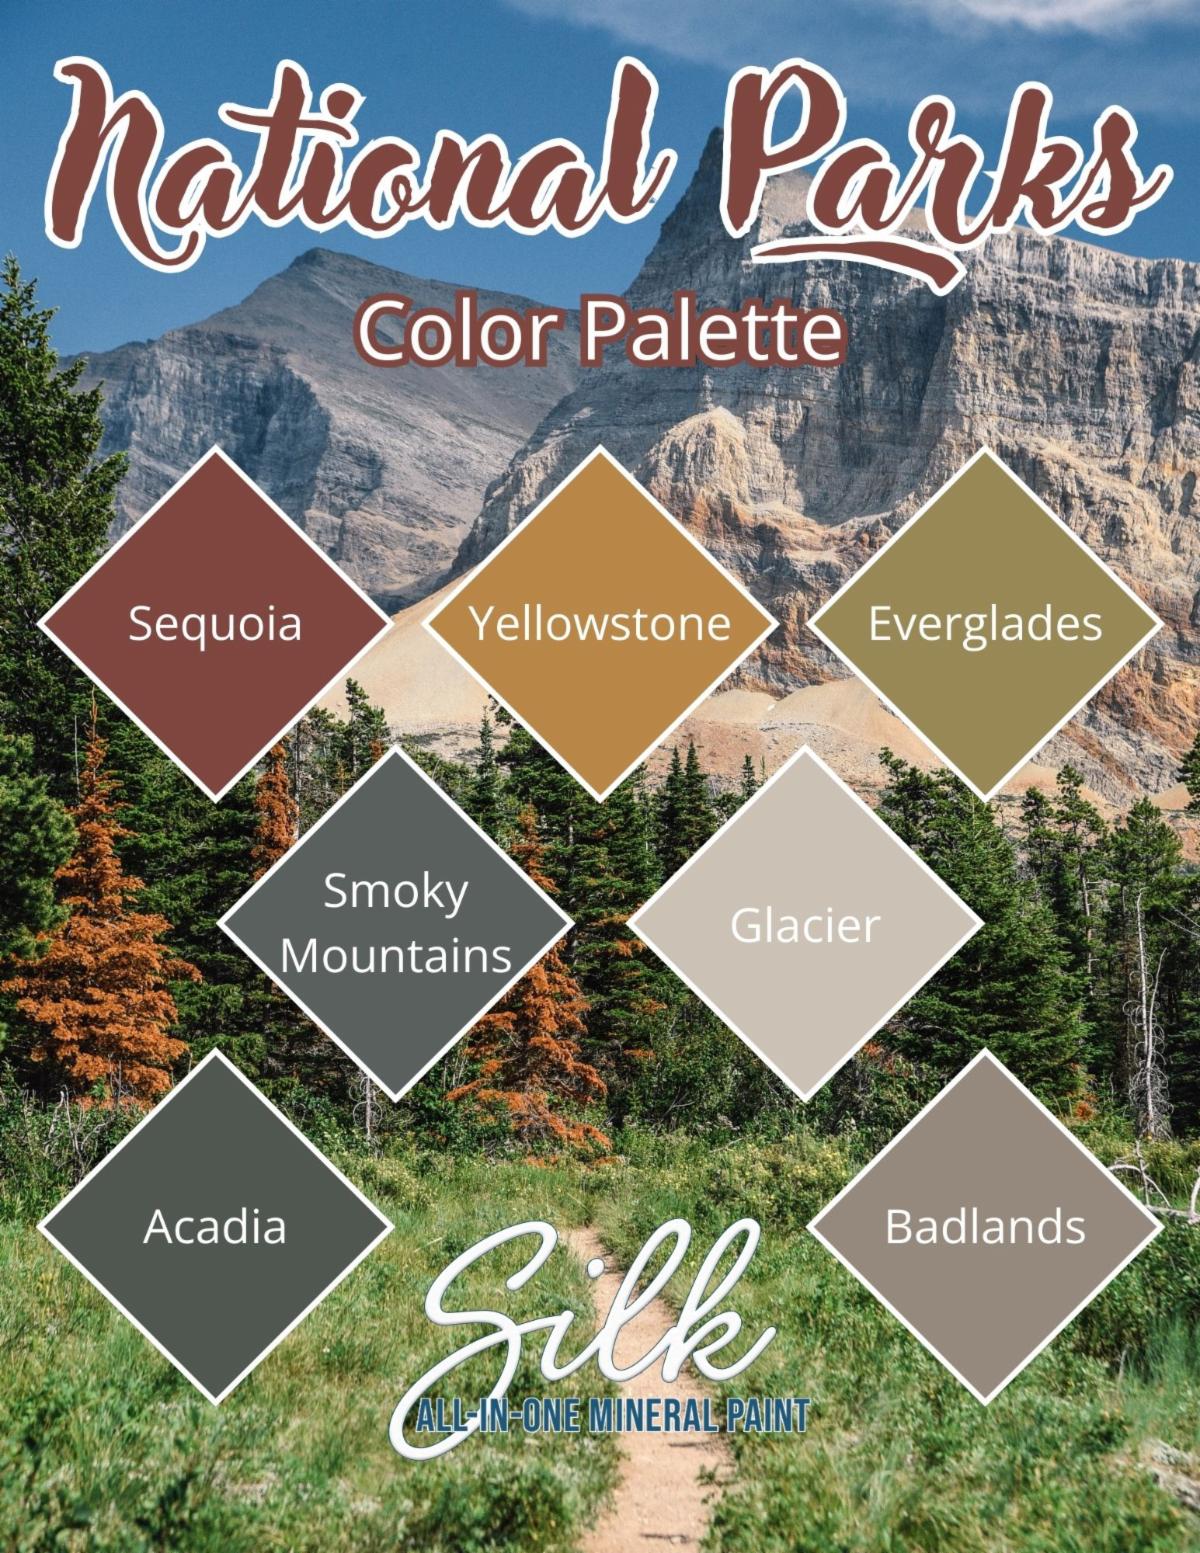 Badlands Silk All-In-One Mineral Paint - Same Day Shipping - Acrylic Based Paint - Built in Primer and Topcoat - Furniture Paint